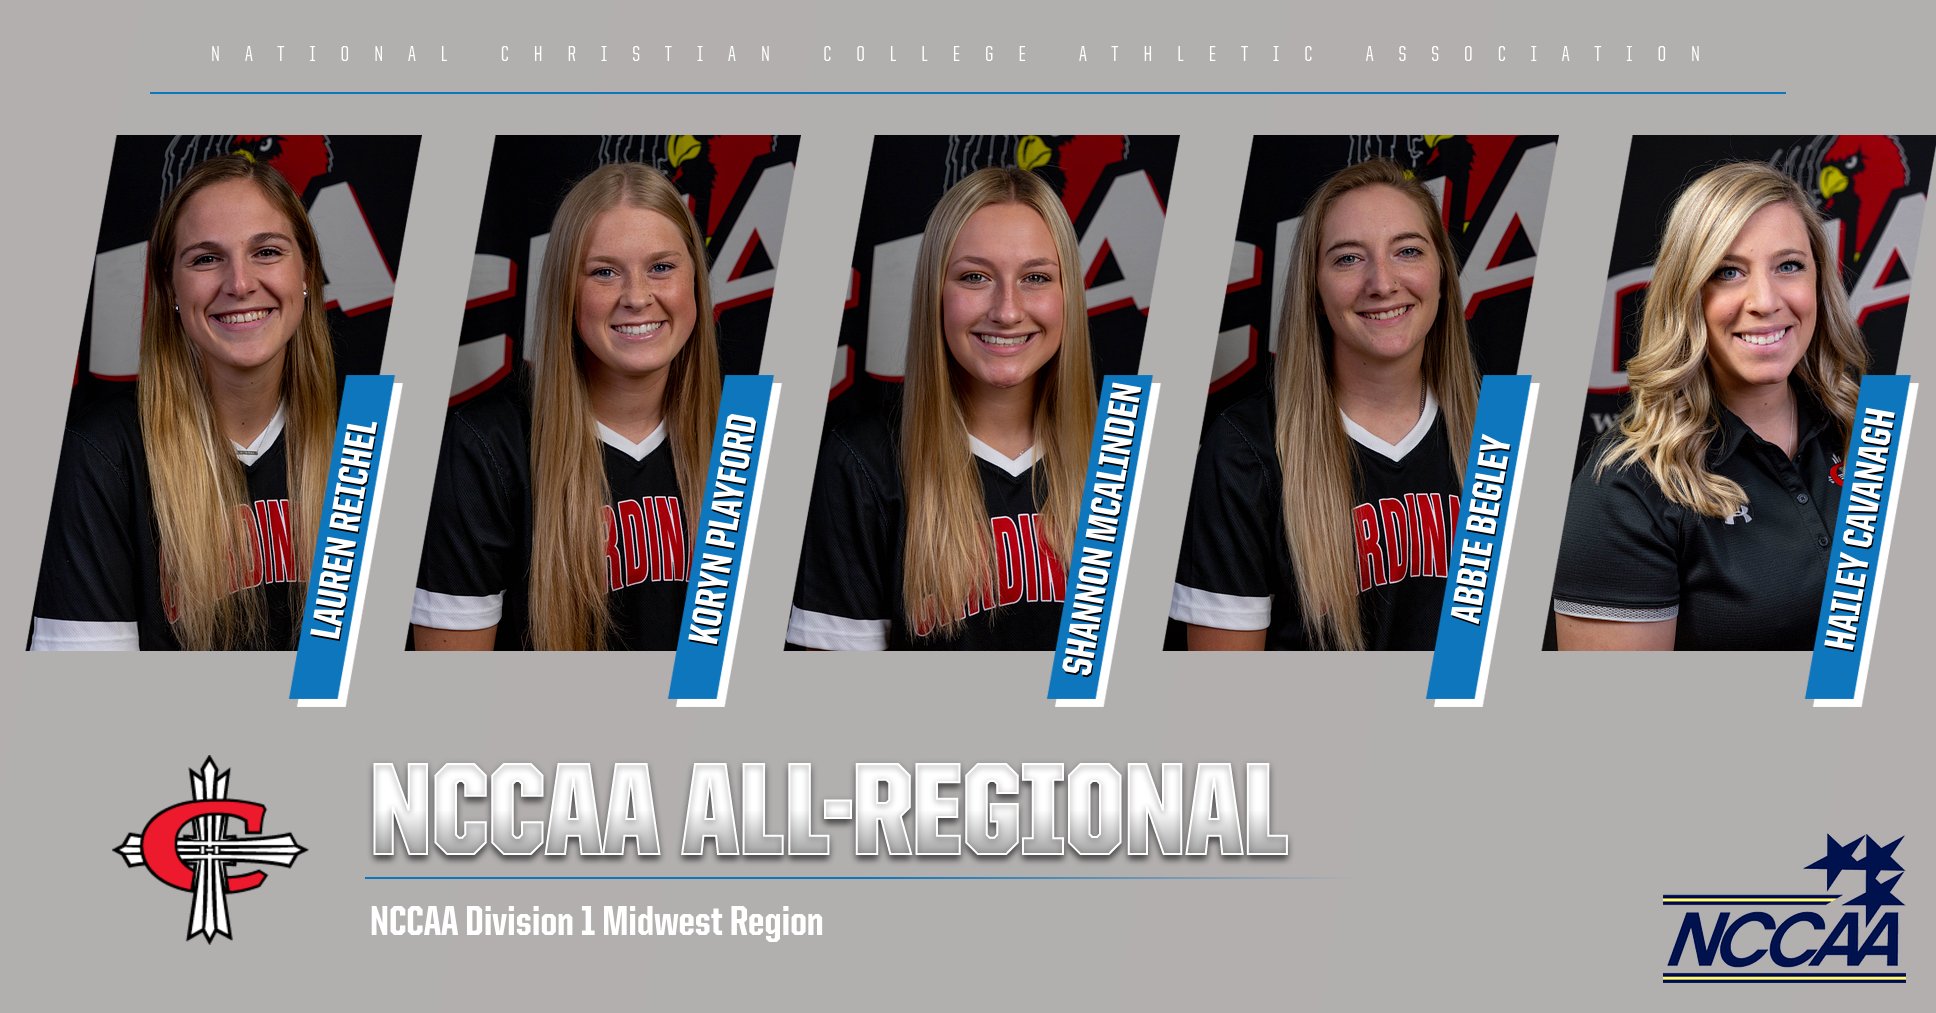 Five Cardinals named to NCCAA All-Regional Team